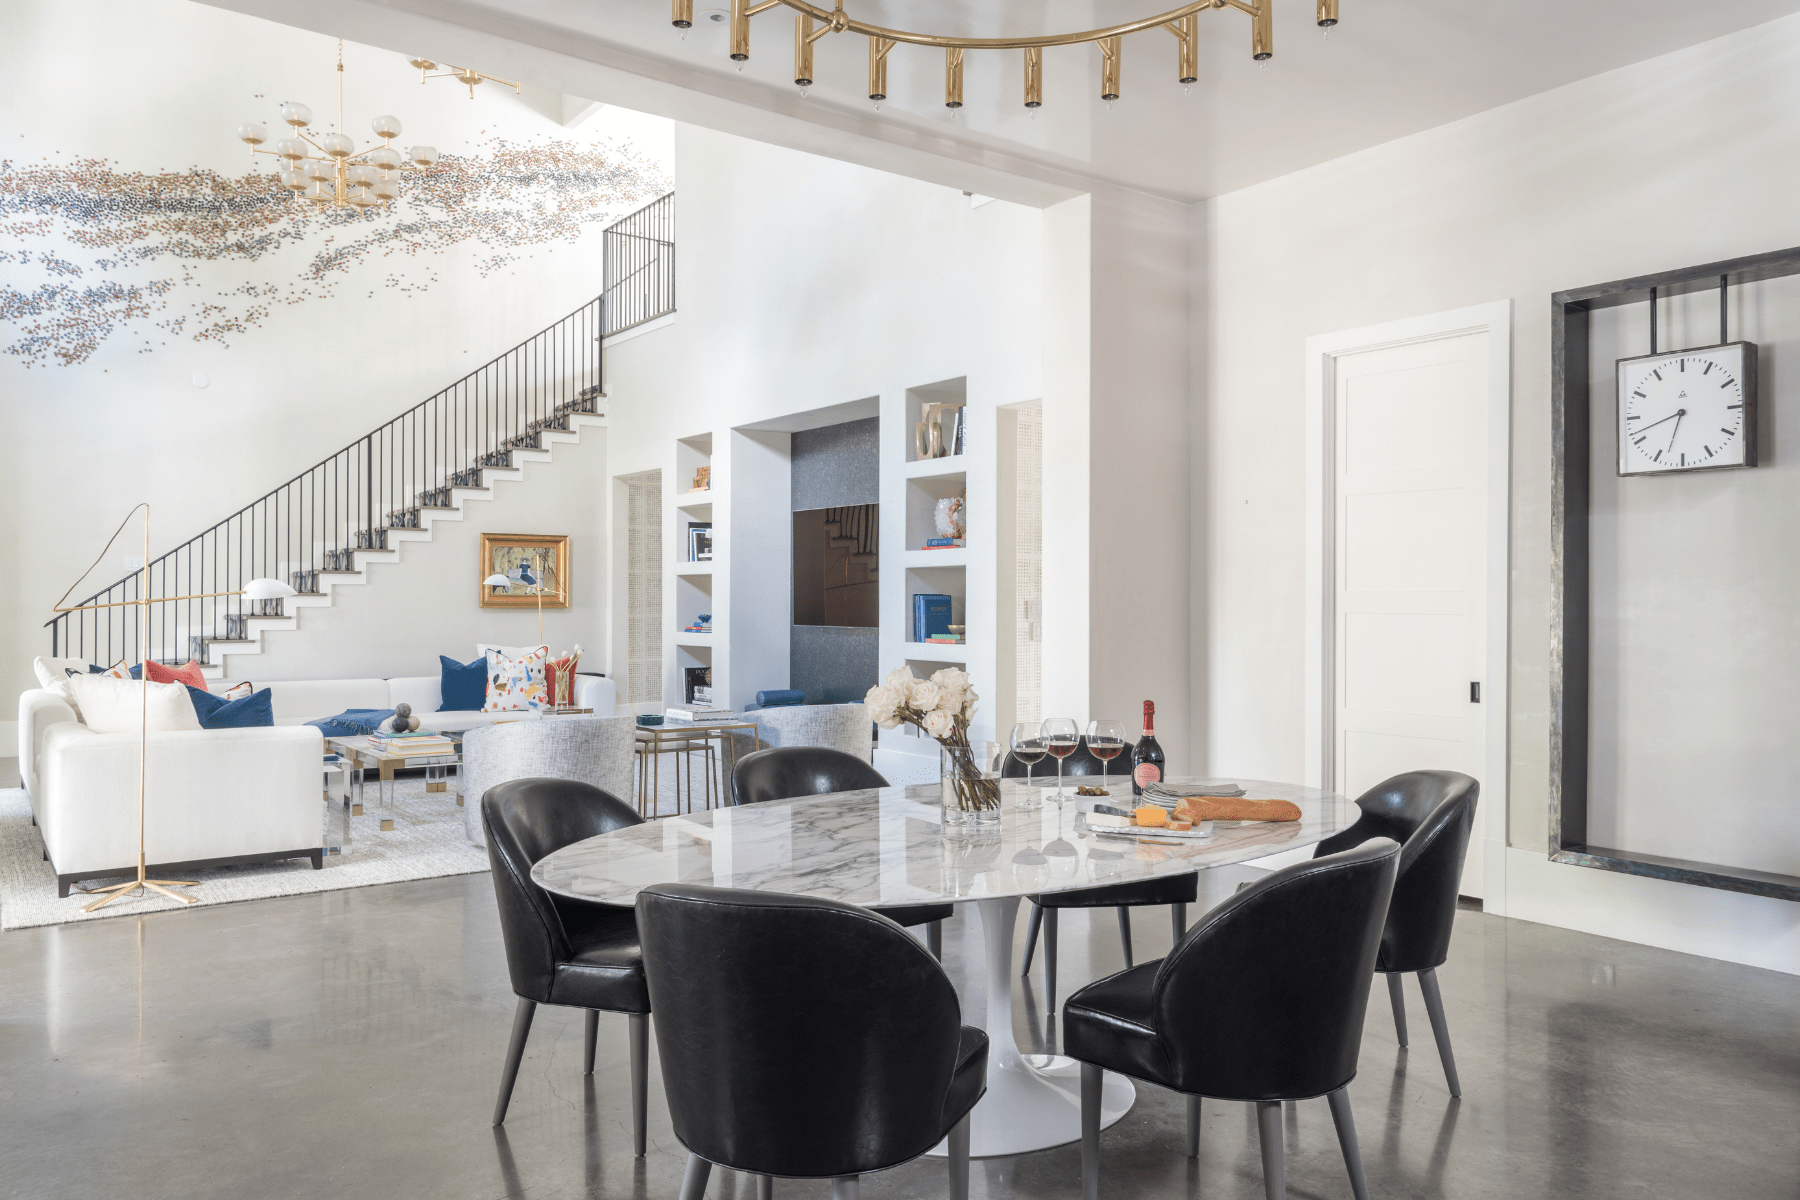 Black chairs surround a marble top dining table in an open concept living area, designed by Laura U.